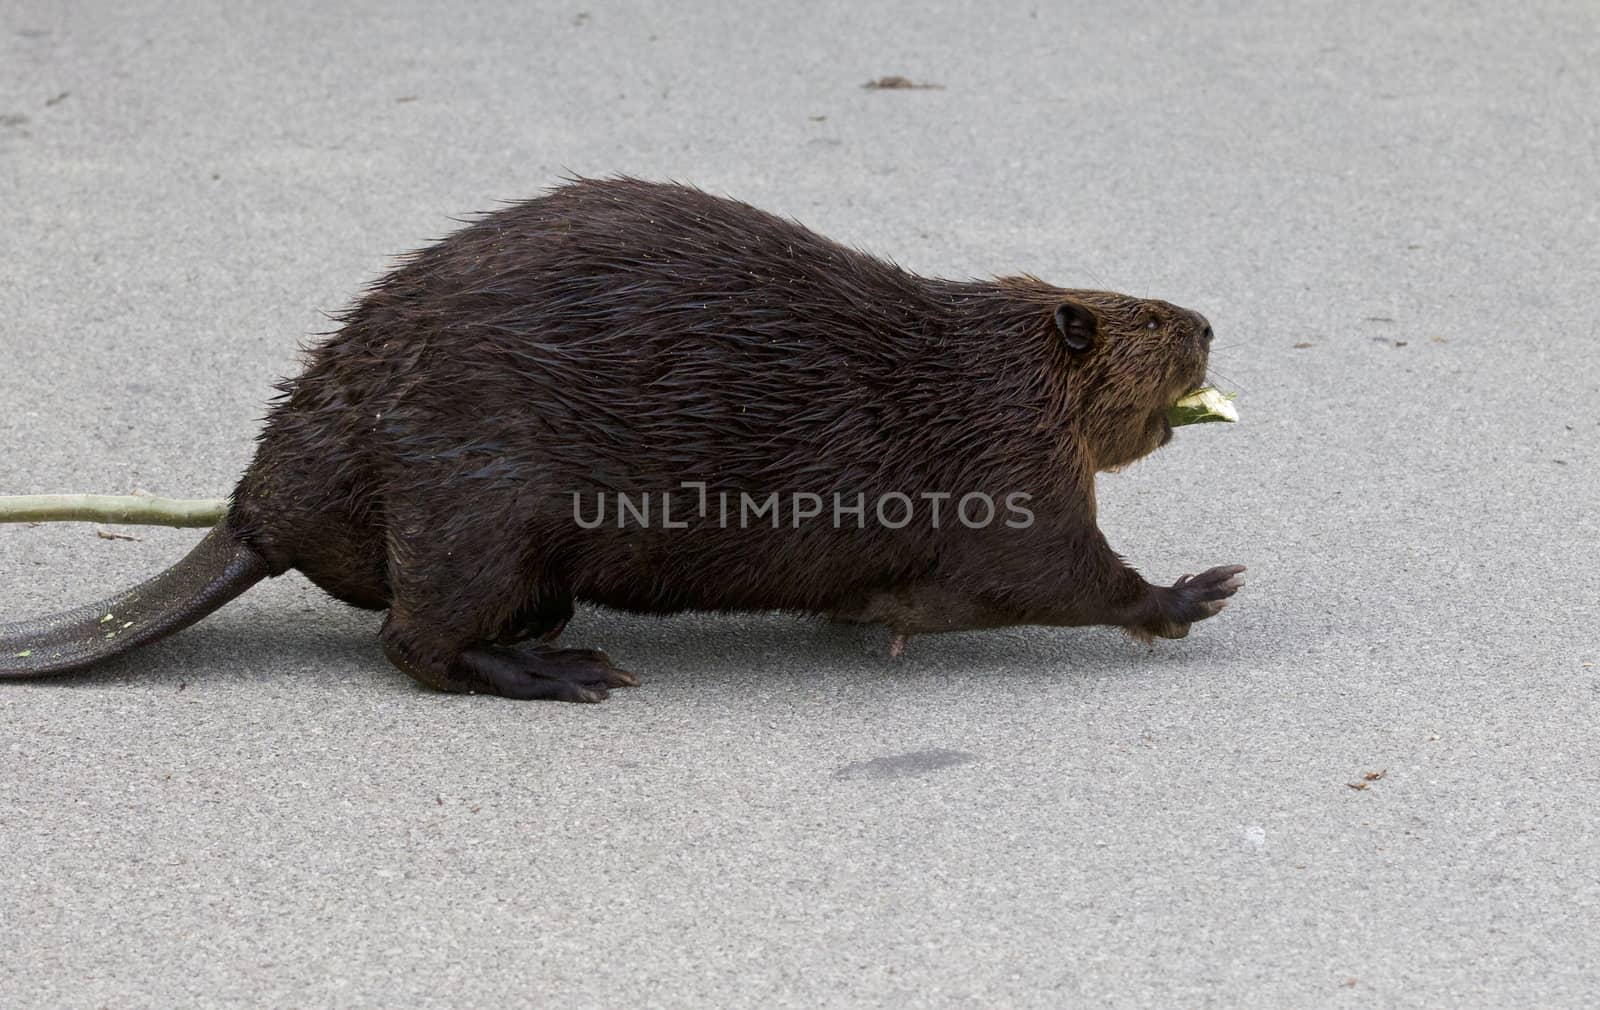 Isolated close image with a funny Canadian beaver